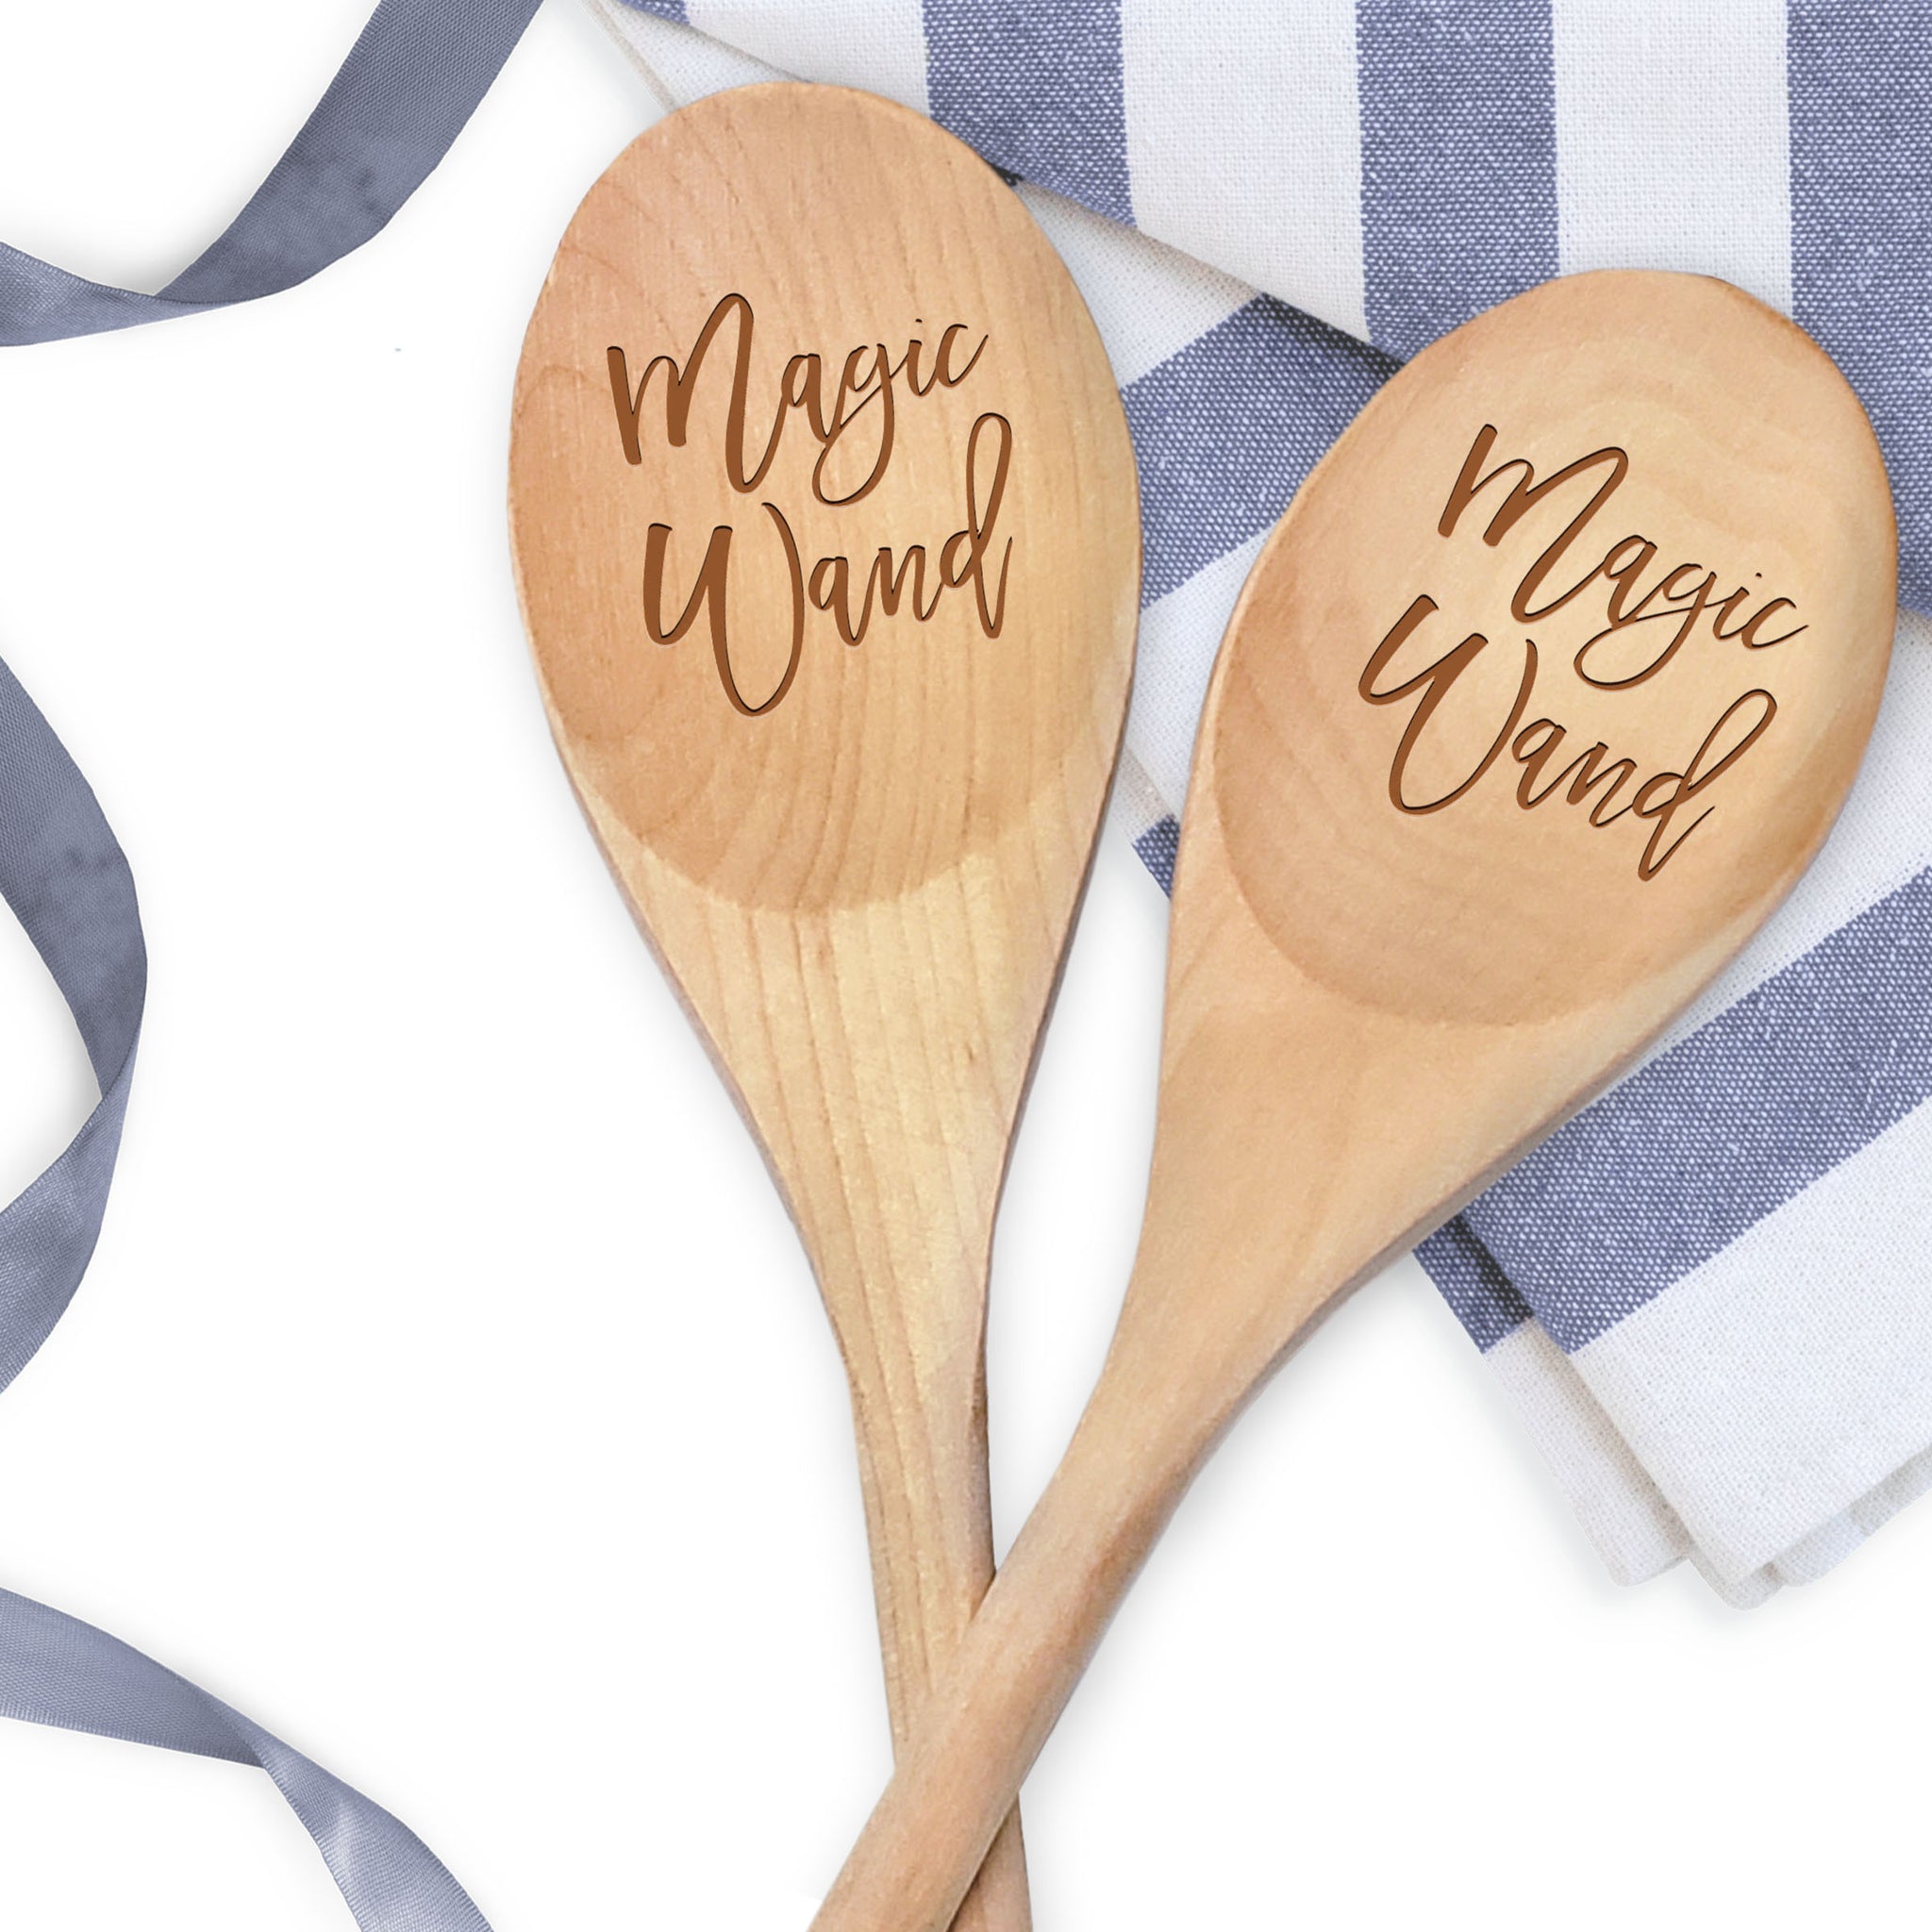 Magic Wand Spoon Engraved Wooden Spoon Fantasy Spoon Magical Spoon Funny  Wooden Spoon Magic Kitchen Utensils Baking Tools 